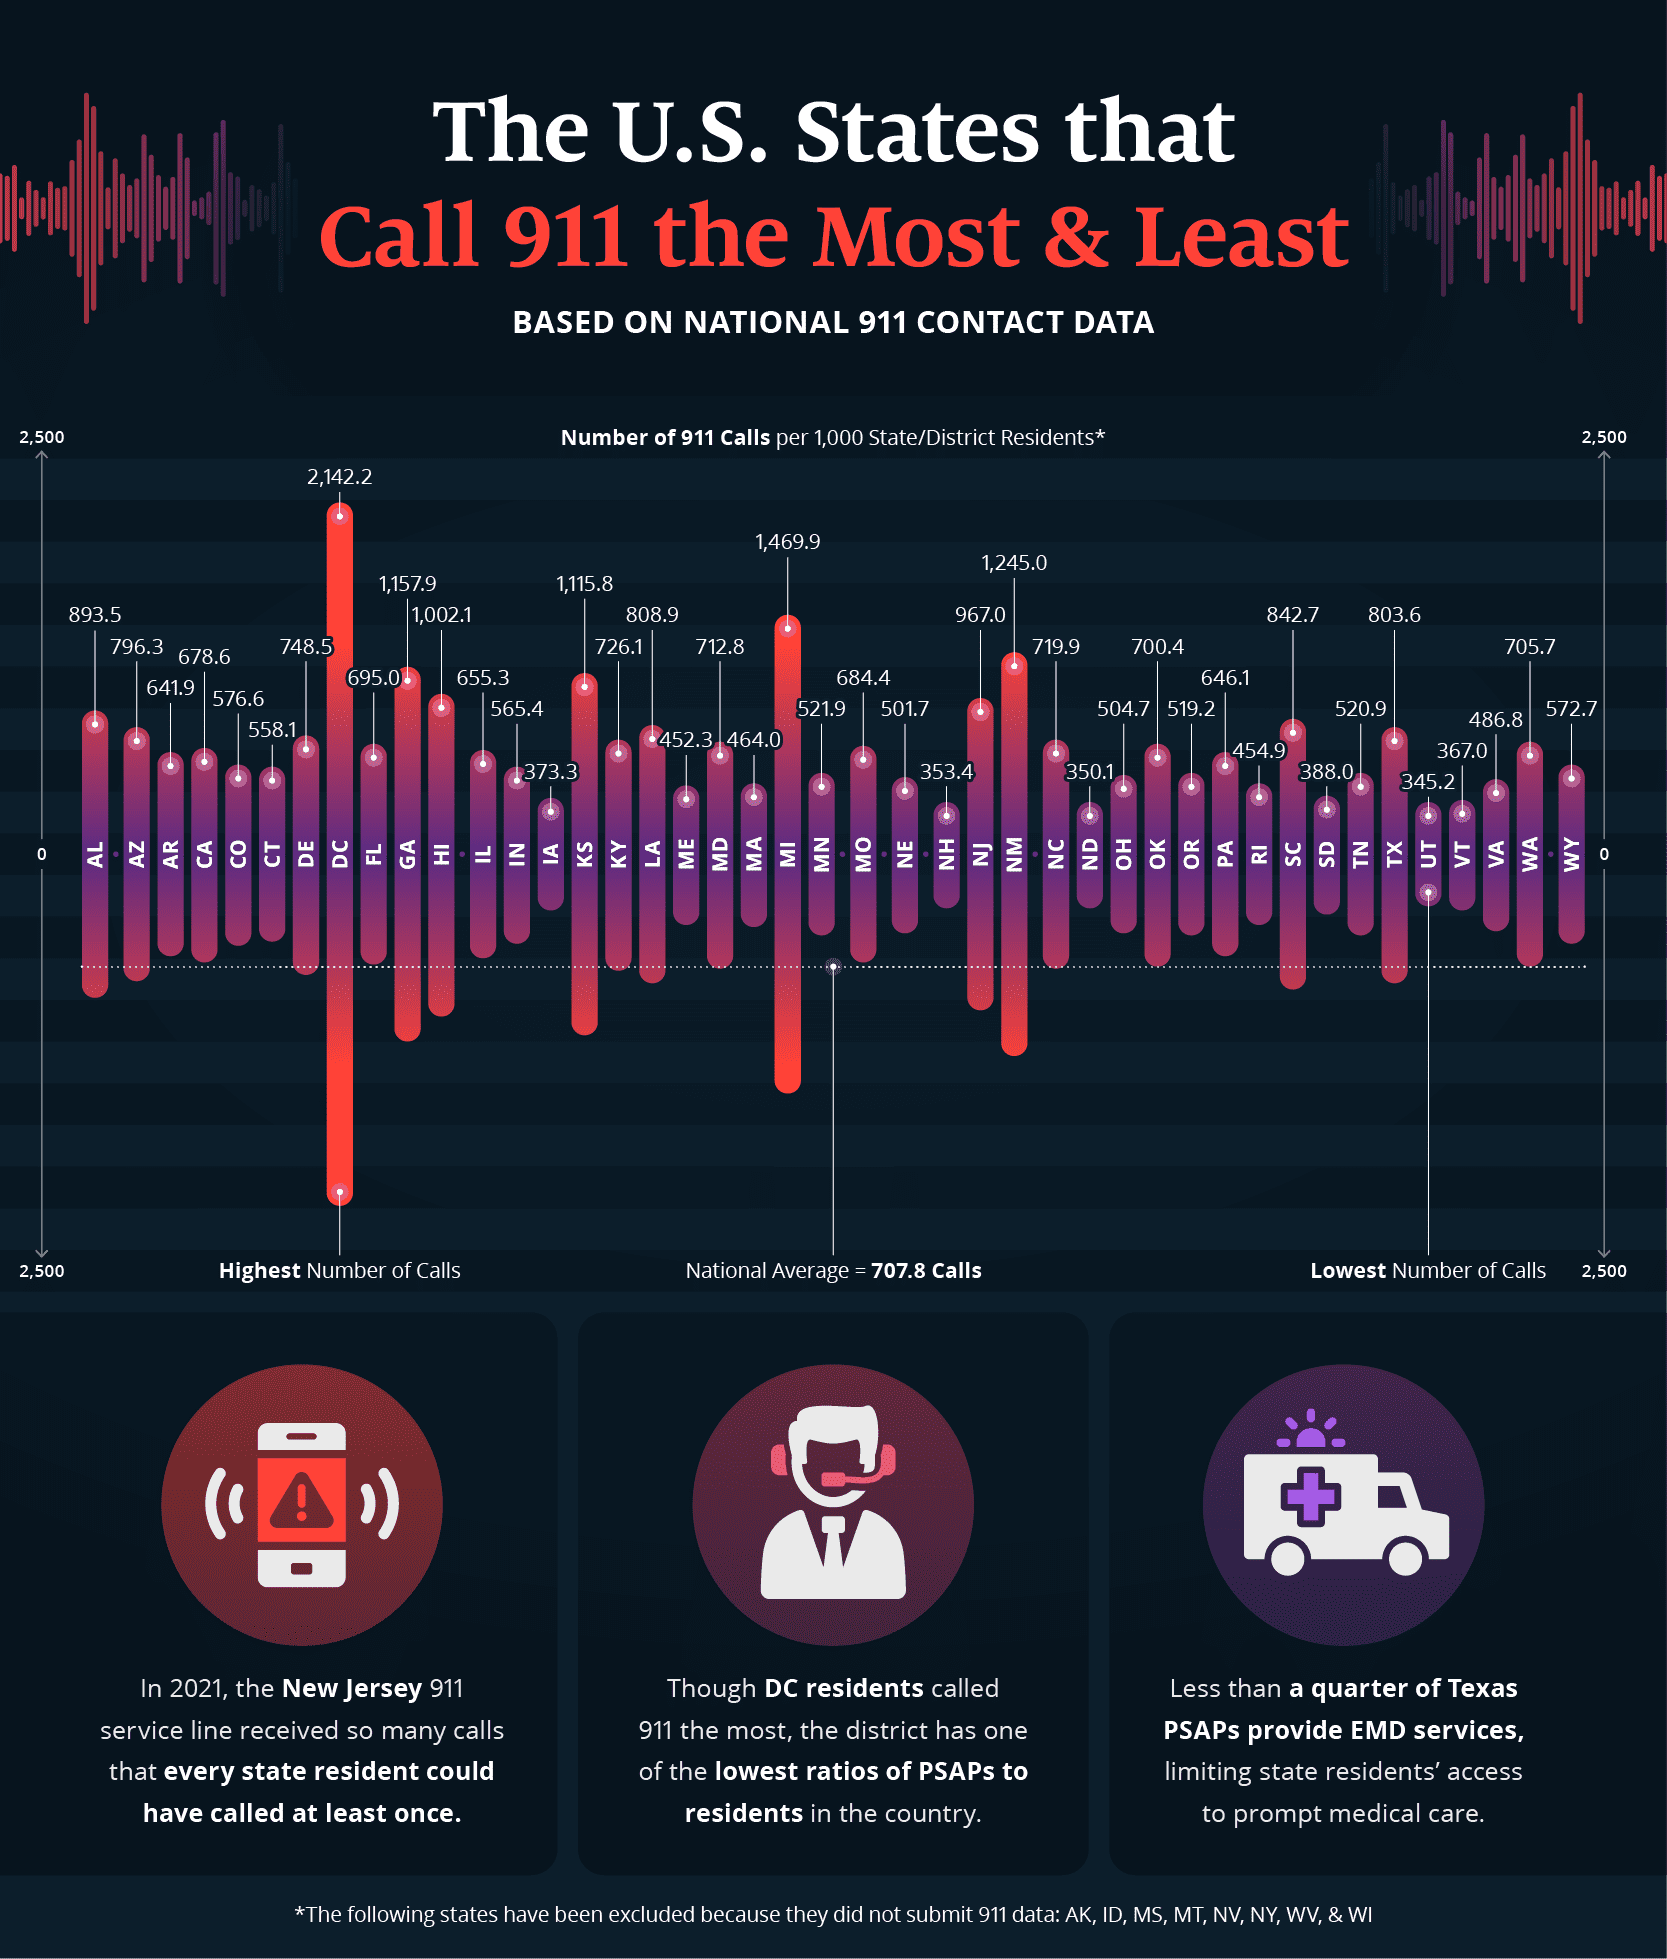 Radial chart organizing states by how frequently they call 911.